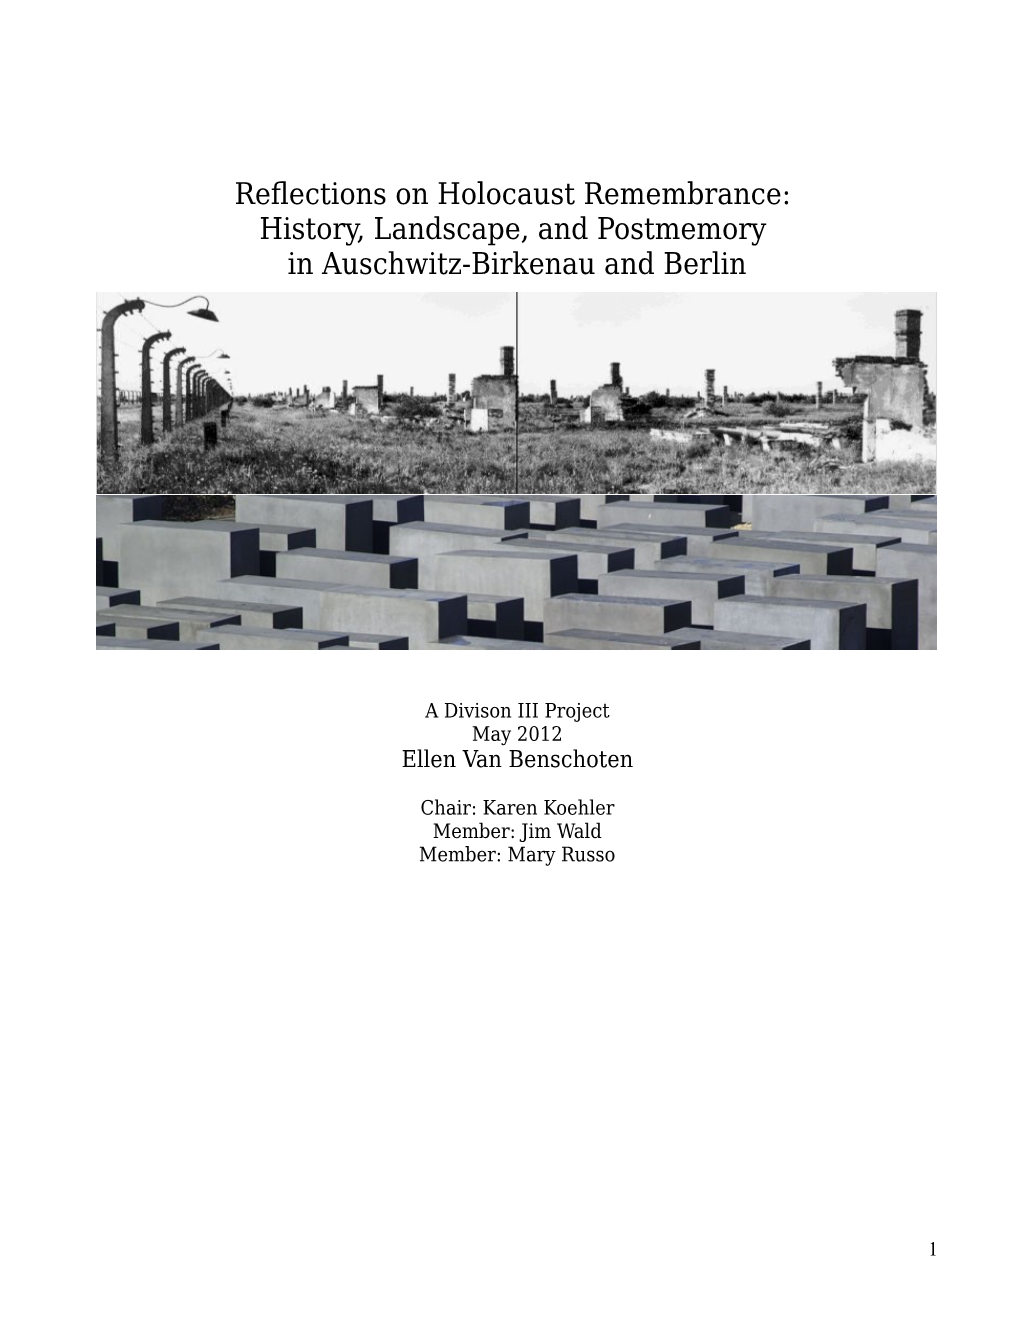 Reflections on Holocaust Remembrance: History, Landscape, and Postmemory in Auschwitz-Birkenau and Berlin